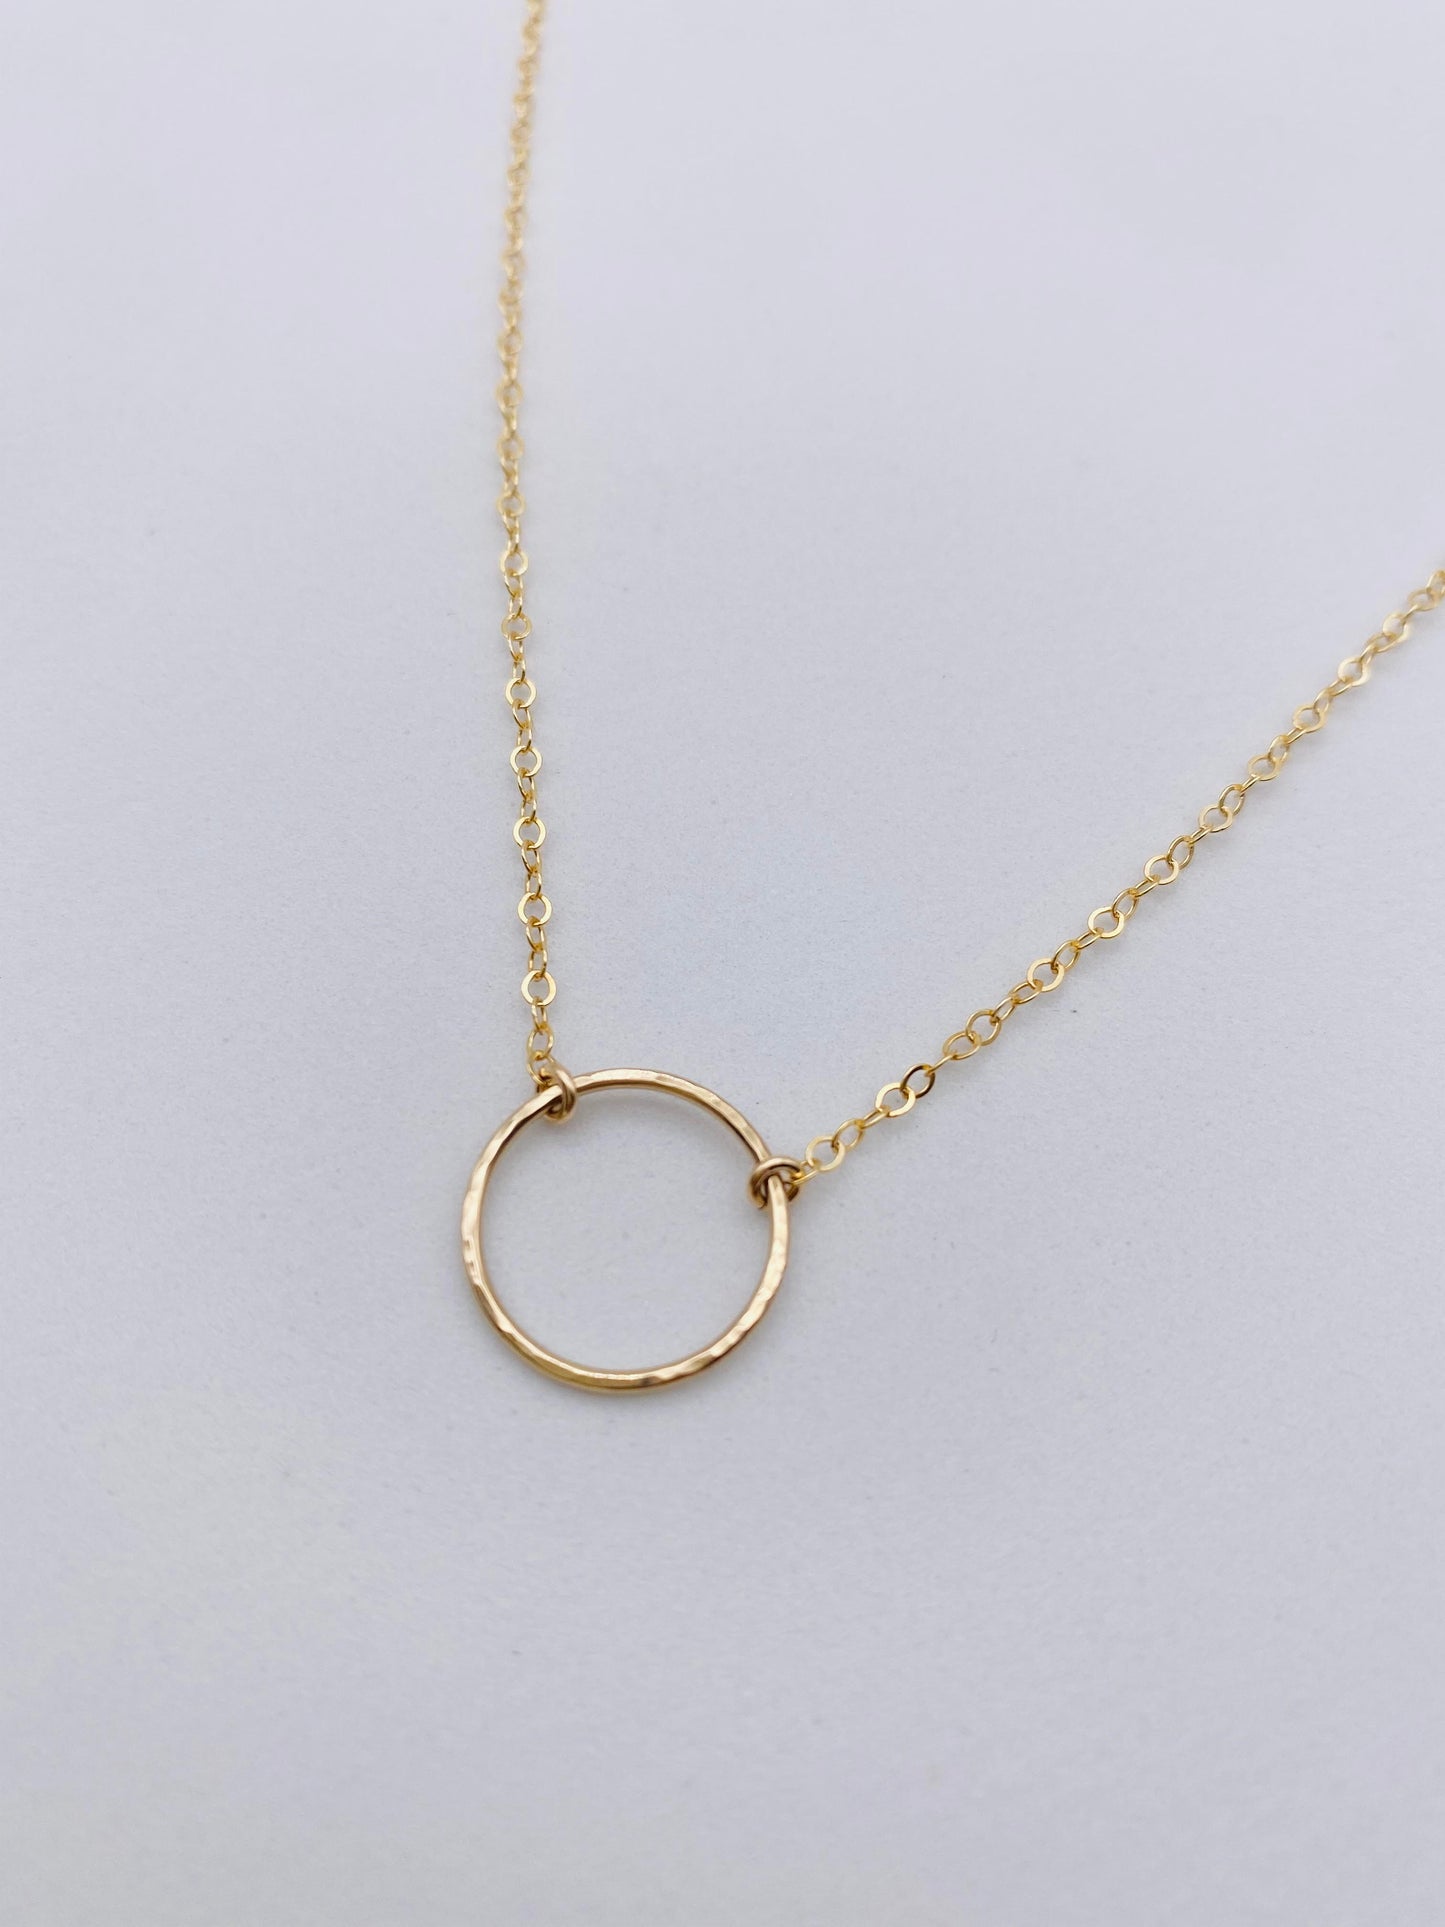 Simple Circle Hammered Pendant - Gold Filled Necklace